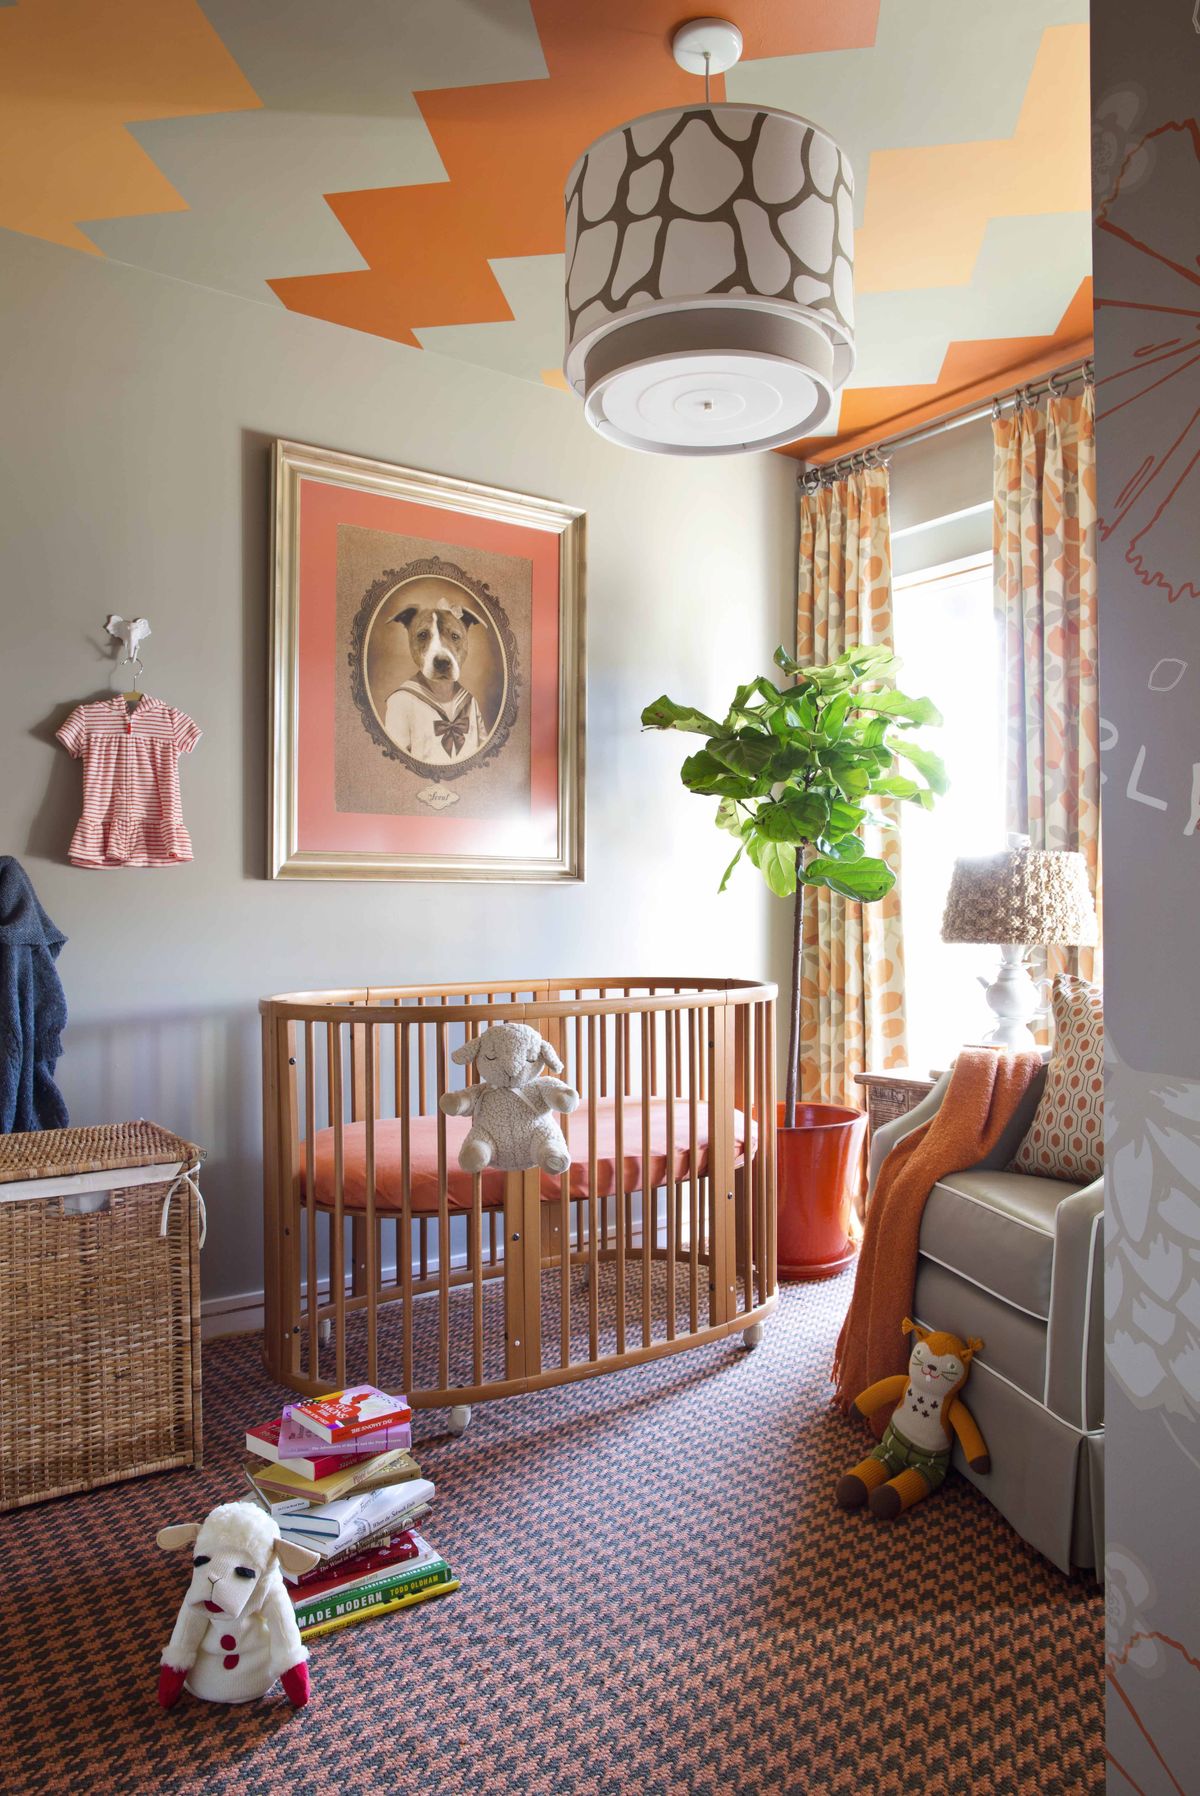 An autumnal nursery designed by Brian Patrick Flynn with ceramic animal hooks for infant clothing in the Brooklyn borough of New York. The hooks add storage space and decorative flair, while making sure favorite outfits get used before the baby grows out of them.